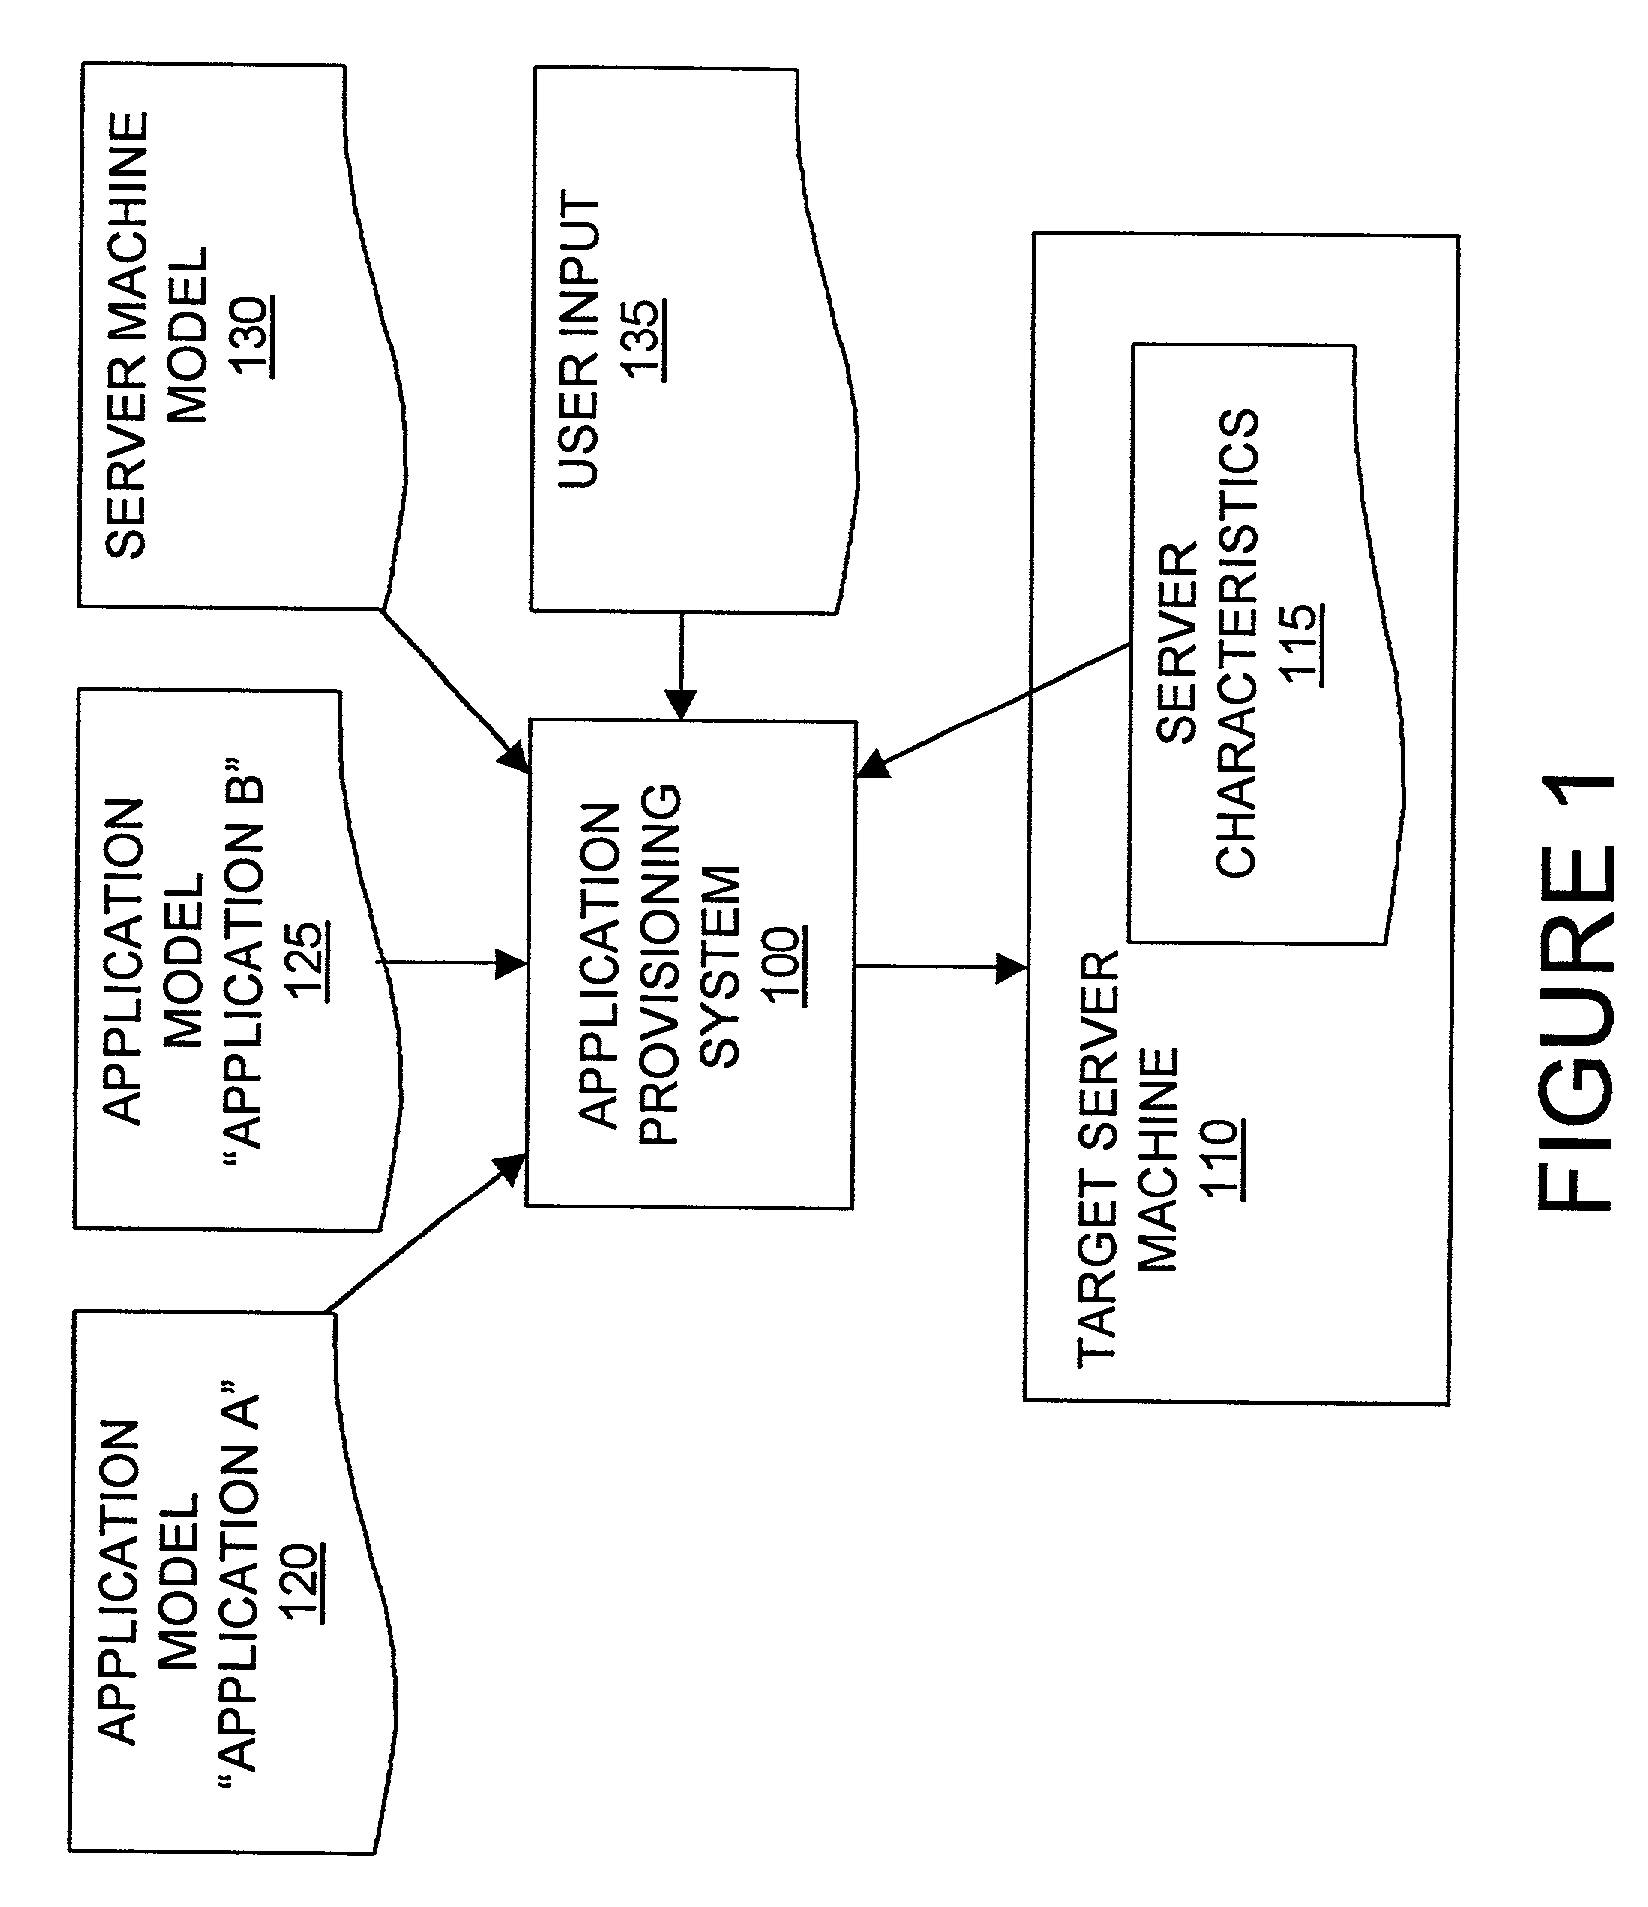 System and method for configurable software provisioning